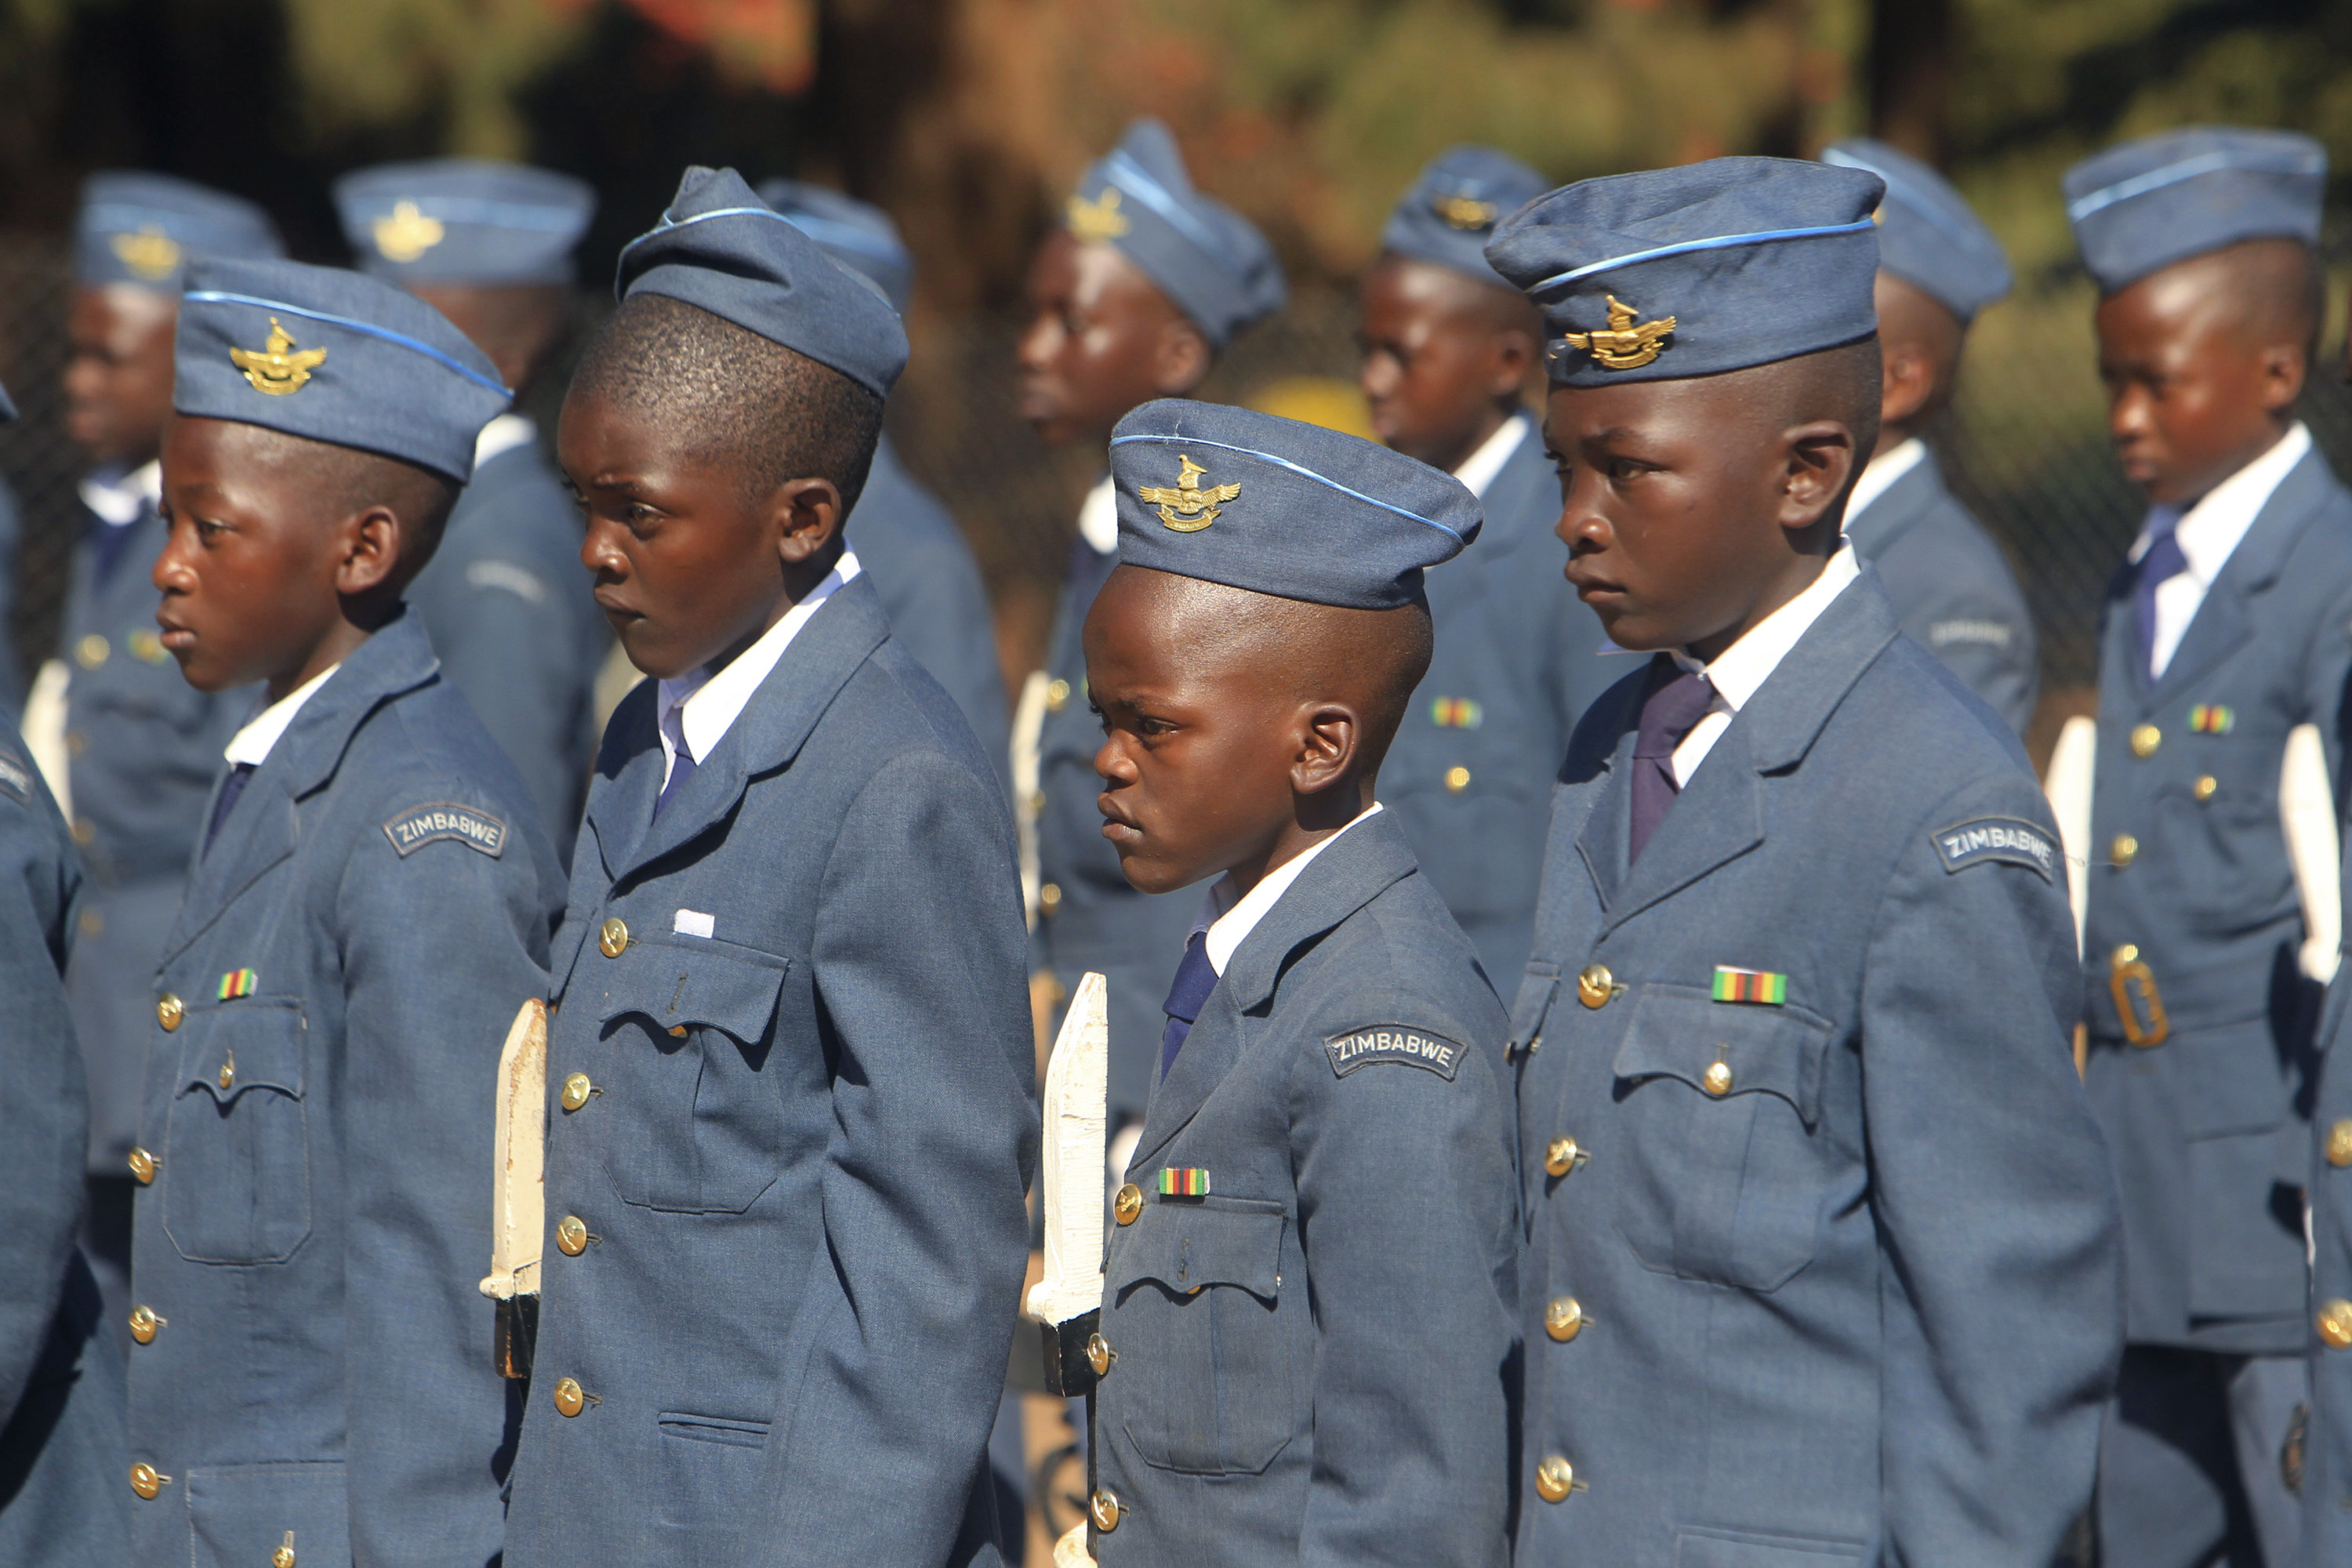 In this June 16, 2018, photo, boys dressed in Air Force uniforms stand during celebrations to mark the Day of the African Child in Harare, Zimbabwe. Day of the African Child is celebrated on June 16 every year to commemorate the 1976 uprising in Soweto, South Africa. (AP/Tsvangirayi Mukwazhi)